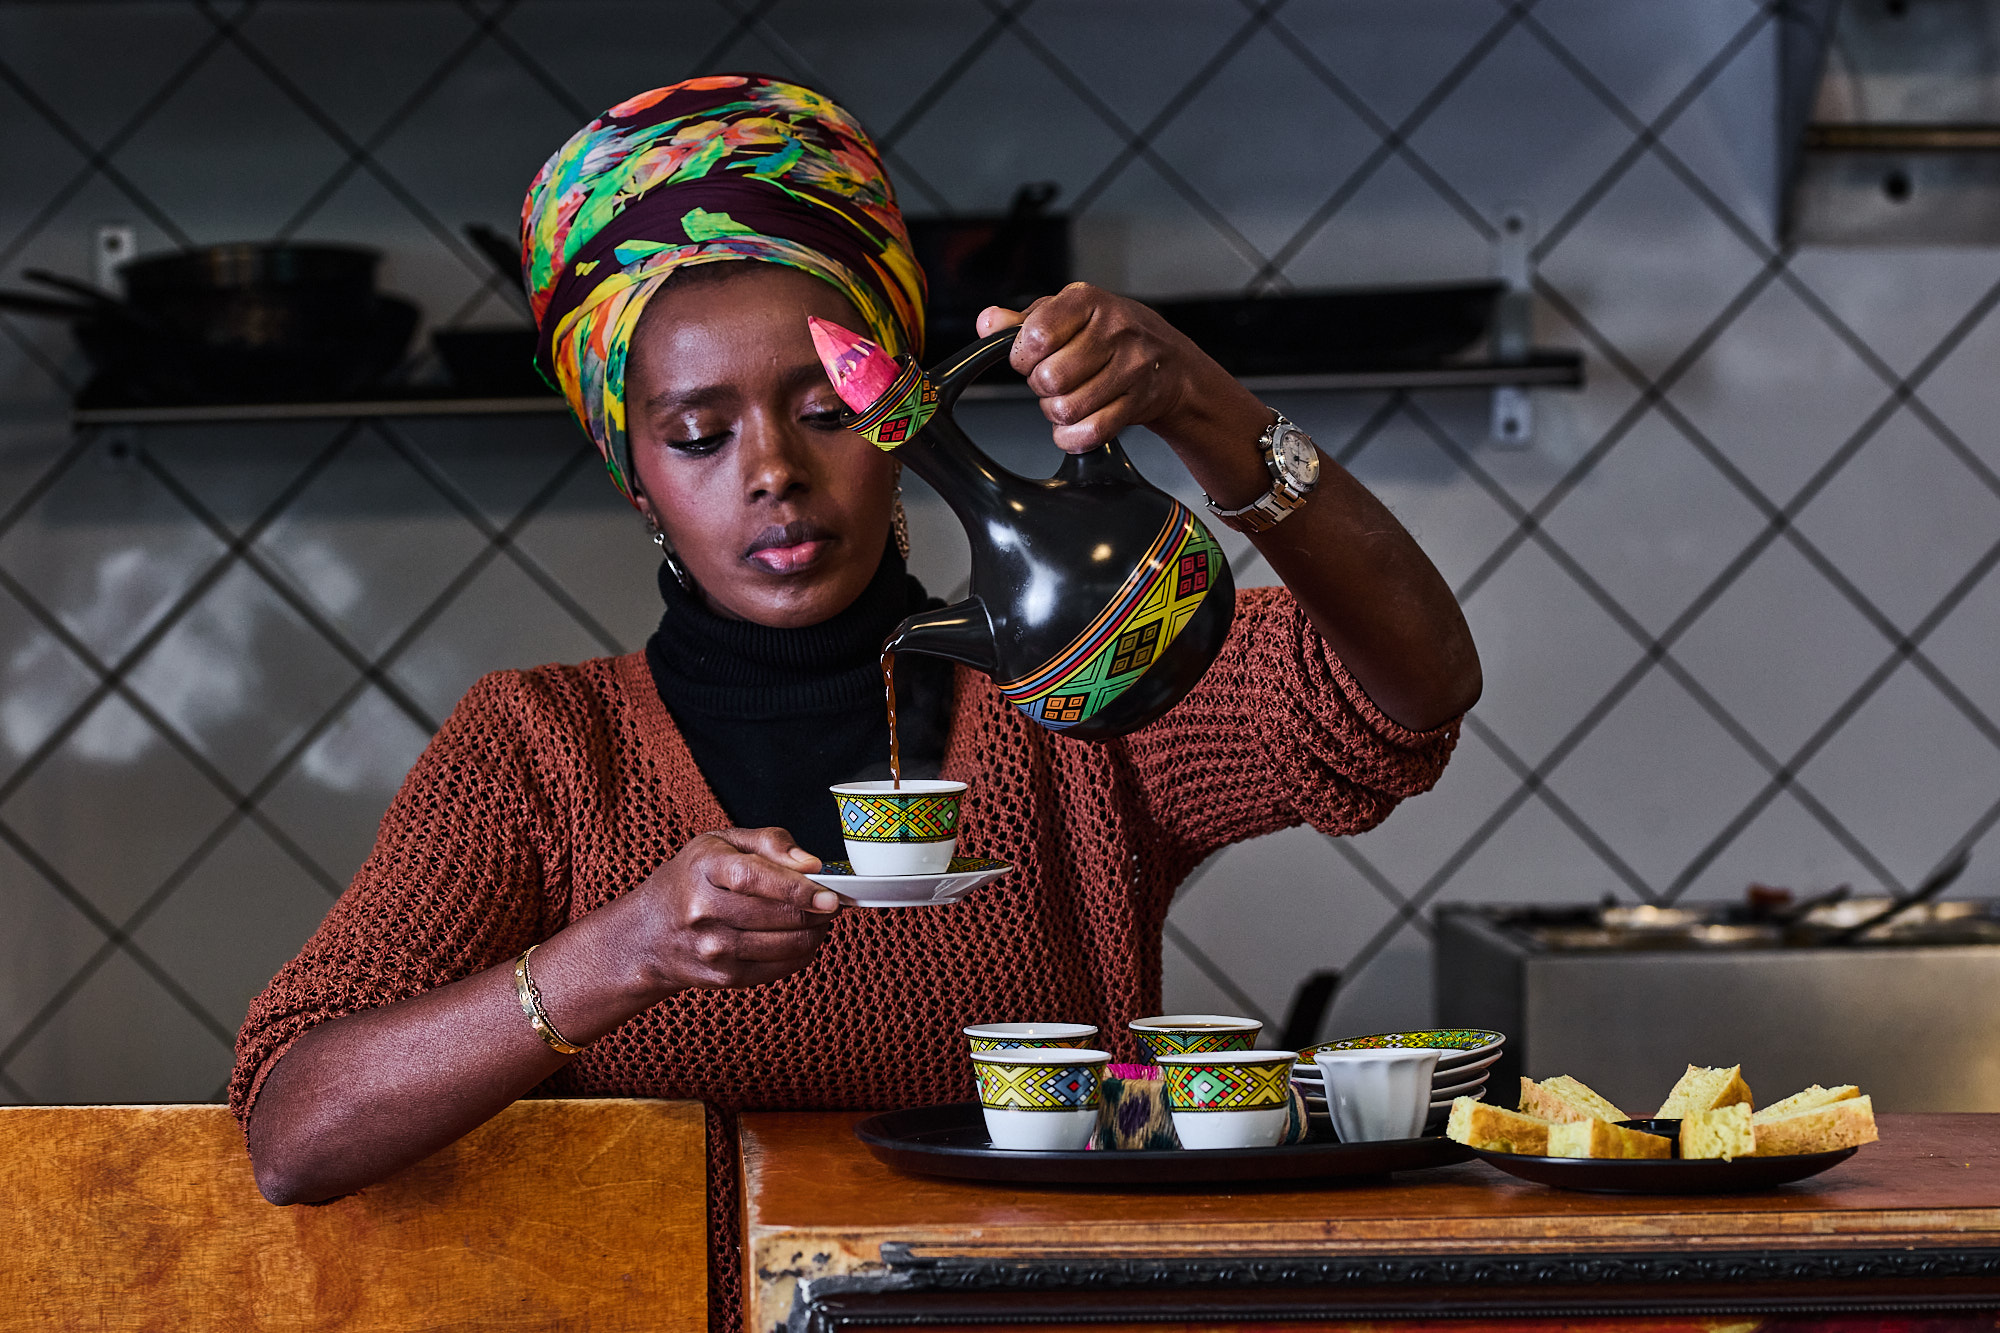 Ethiopian woman with head covering pouring coffee into small, colorful cups